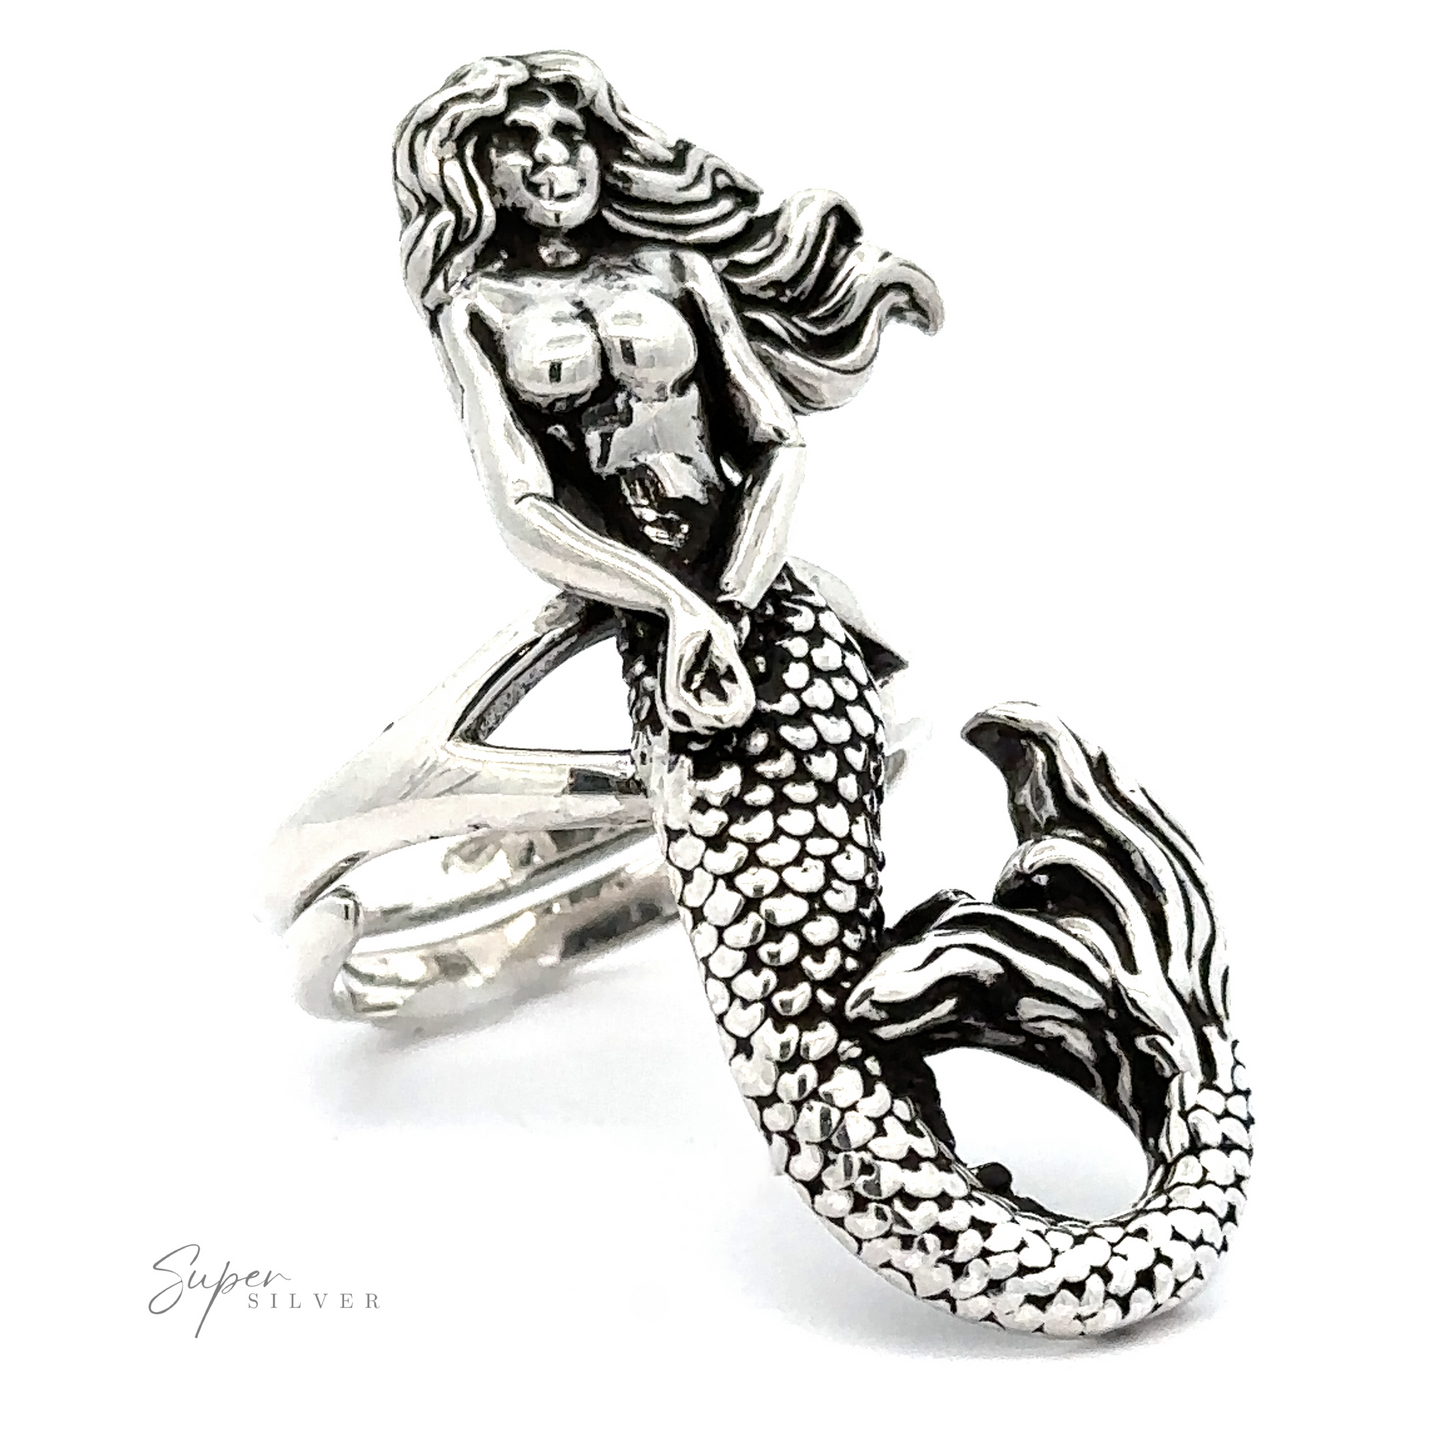 Statement Adjustable Mermaid Ring shaped like a mermaid with detailed scale and hair design, displayed against a white background with a signature at the bottom right. This piece is part of our artisan collections.